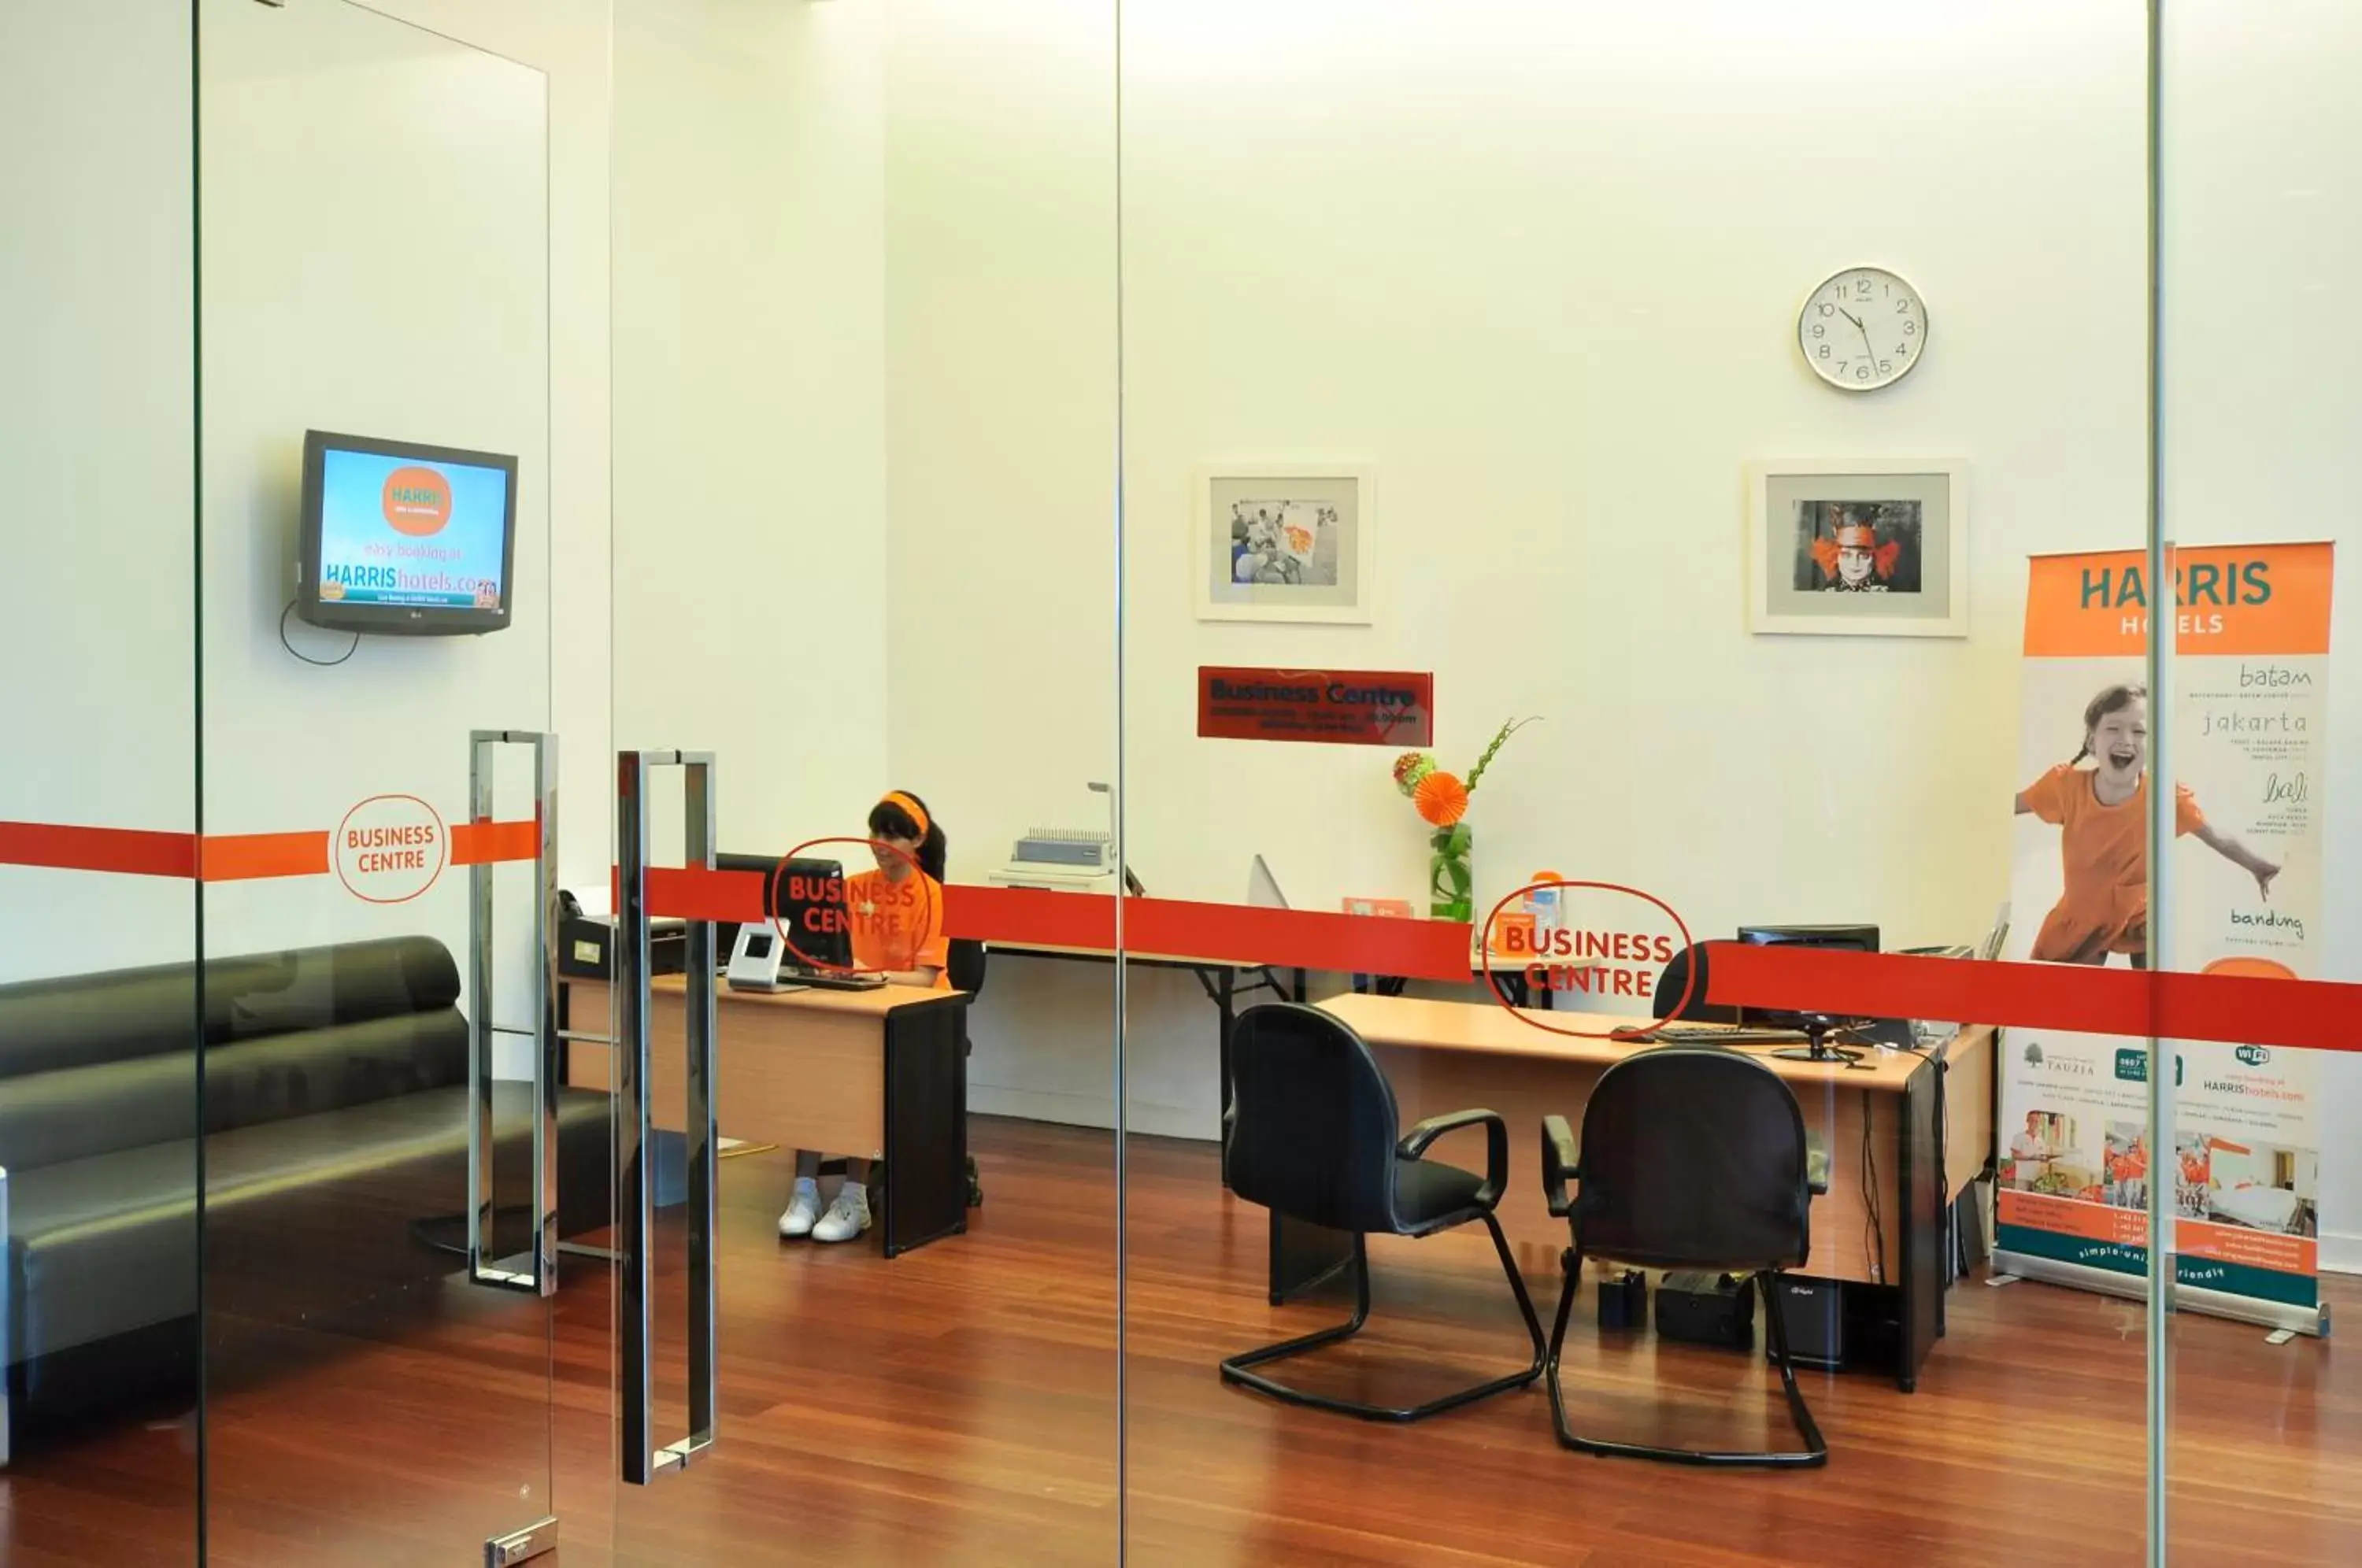 Business facilities, Business Area/Conference Room in HARRIS Hotel and Conventions Kelapa Gading Jakarta